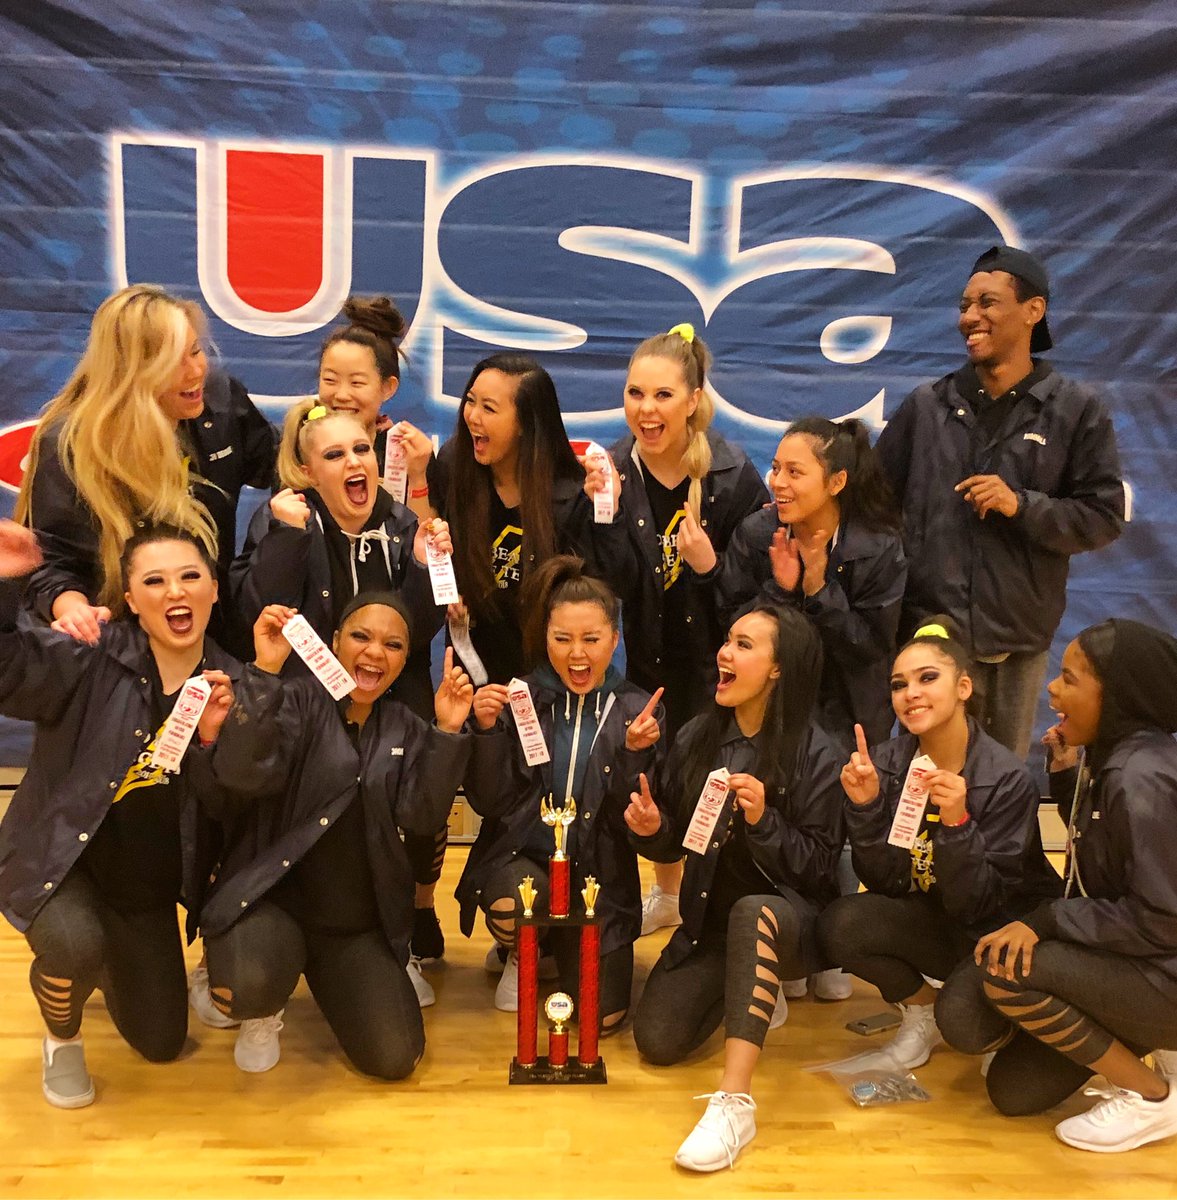 Qualified for CHAMPIONSHIP division for nationals in Cali! The hard work is paying off! 🙌🏻 #letsgobombbeamertitansyouknow #toddbeamerdanceteam #stayhumblestayhungry @usa.danceprogram